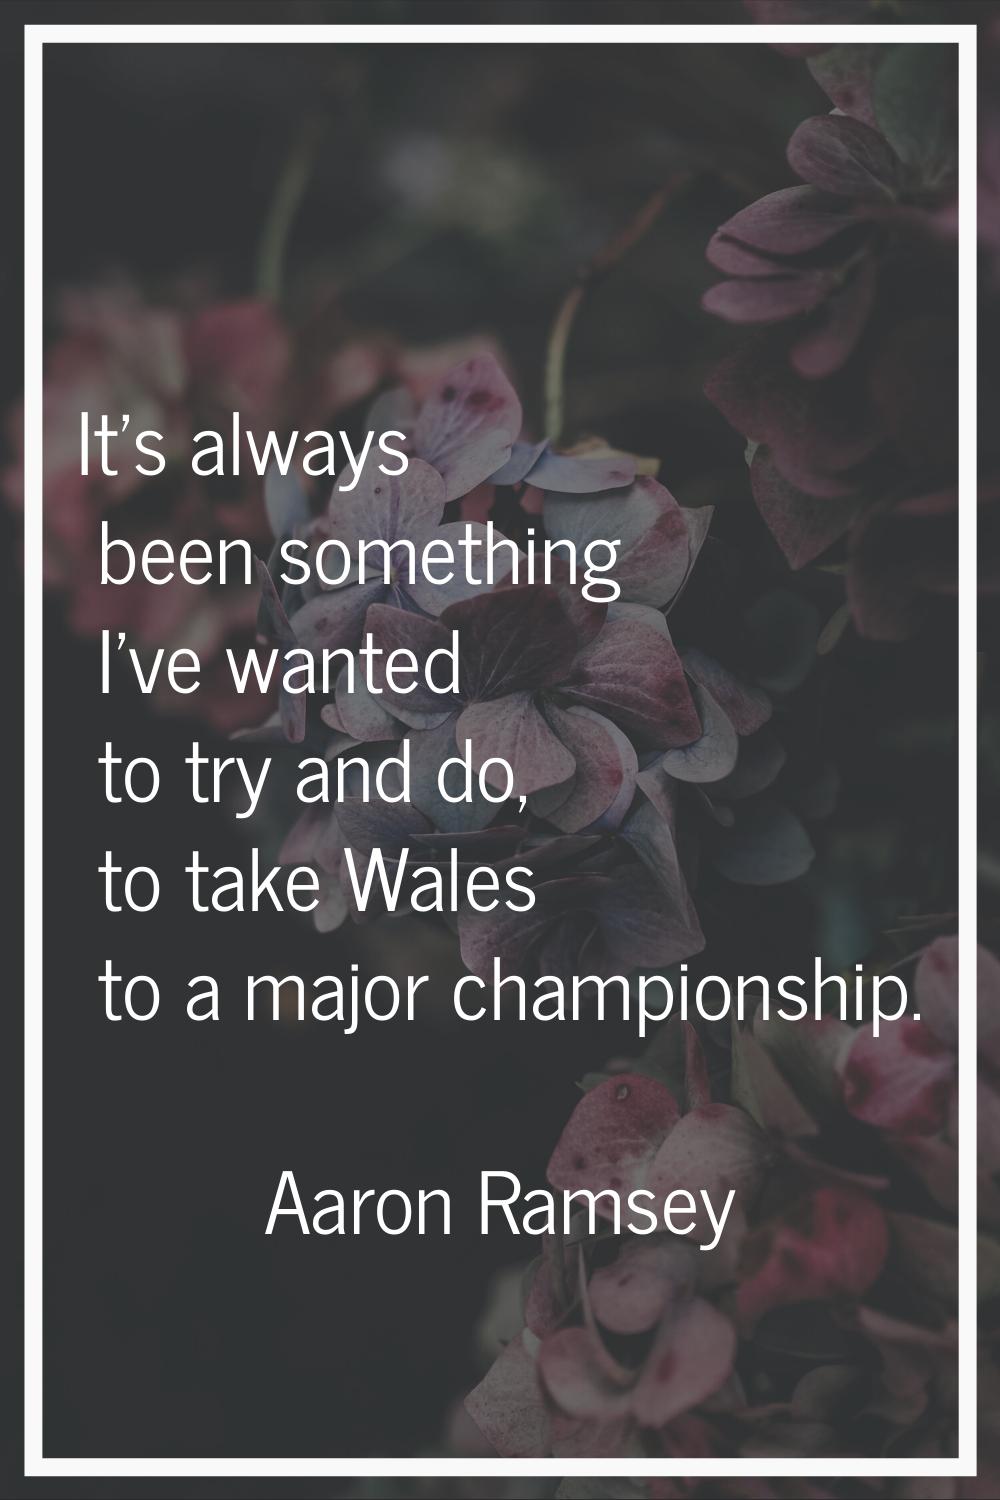 It's always been something I've wanted to try and do, to take Wales to a major championship.